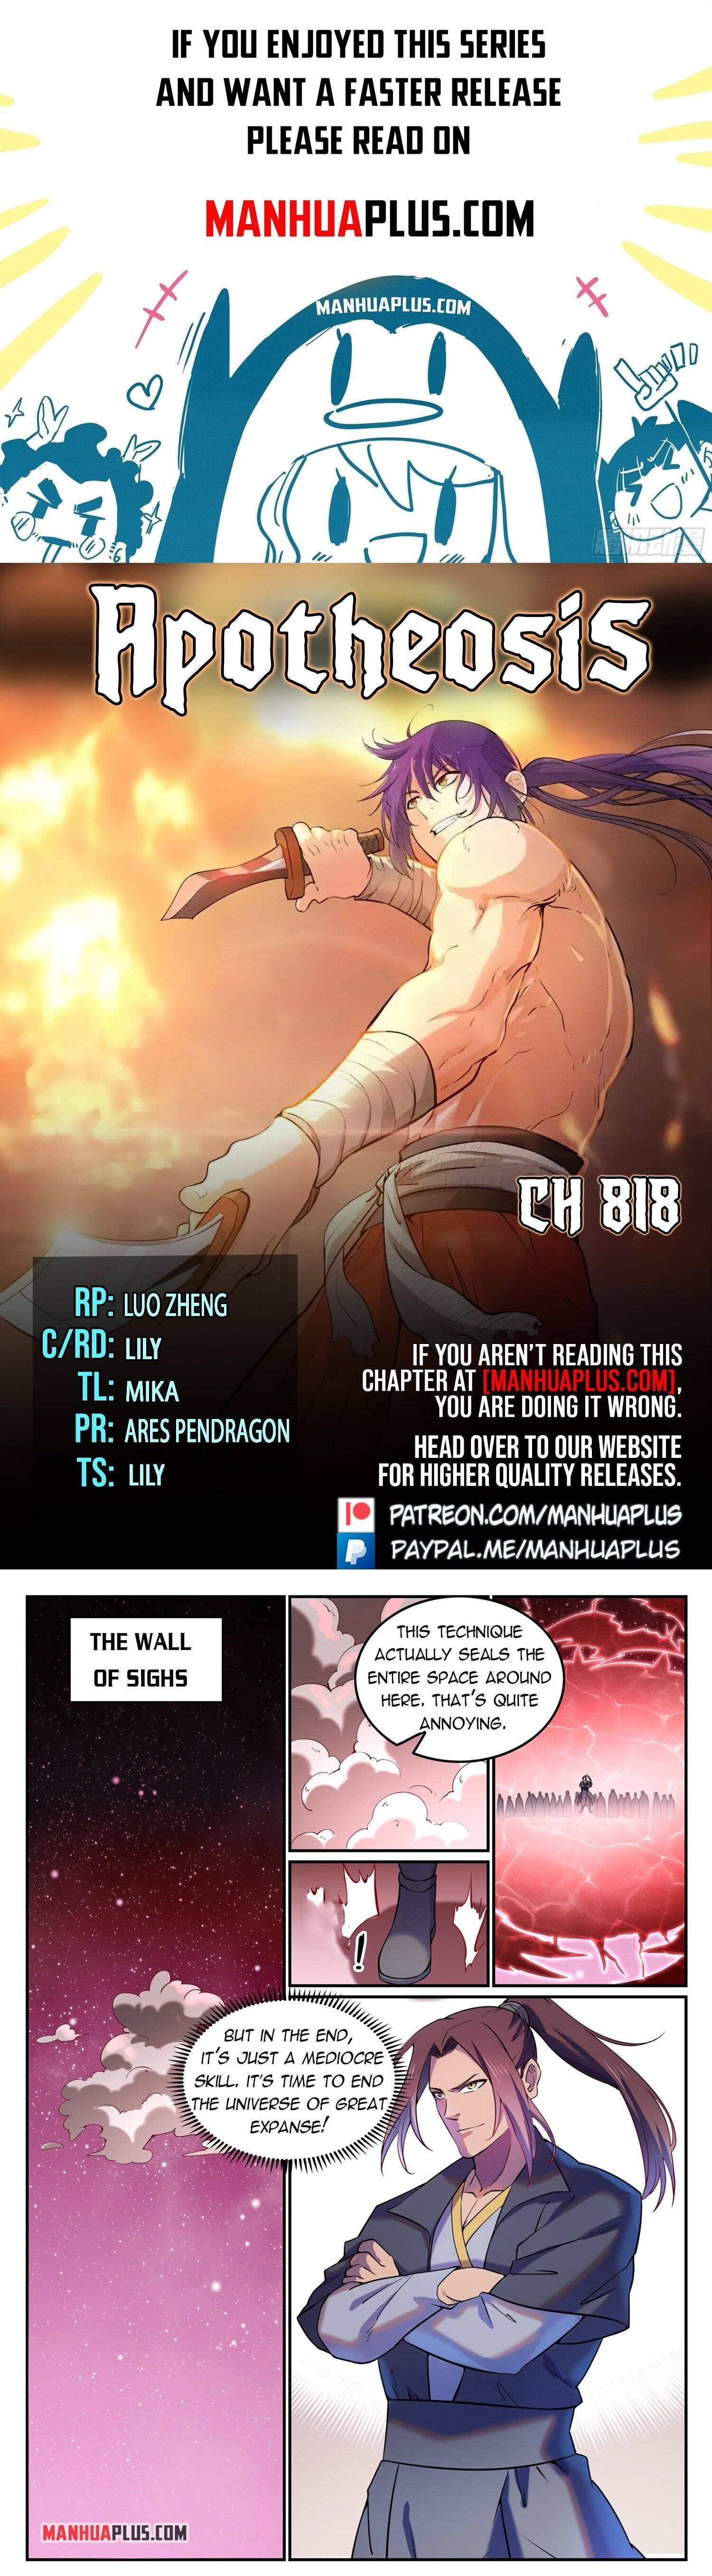 Apotheosis Chapter 818 - Picture 1